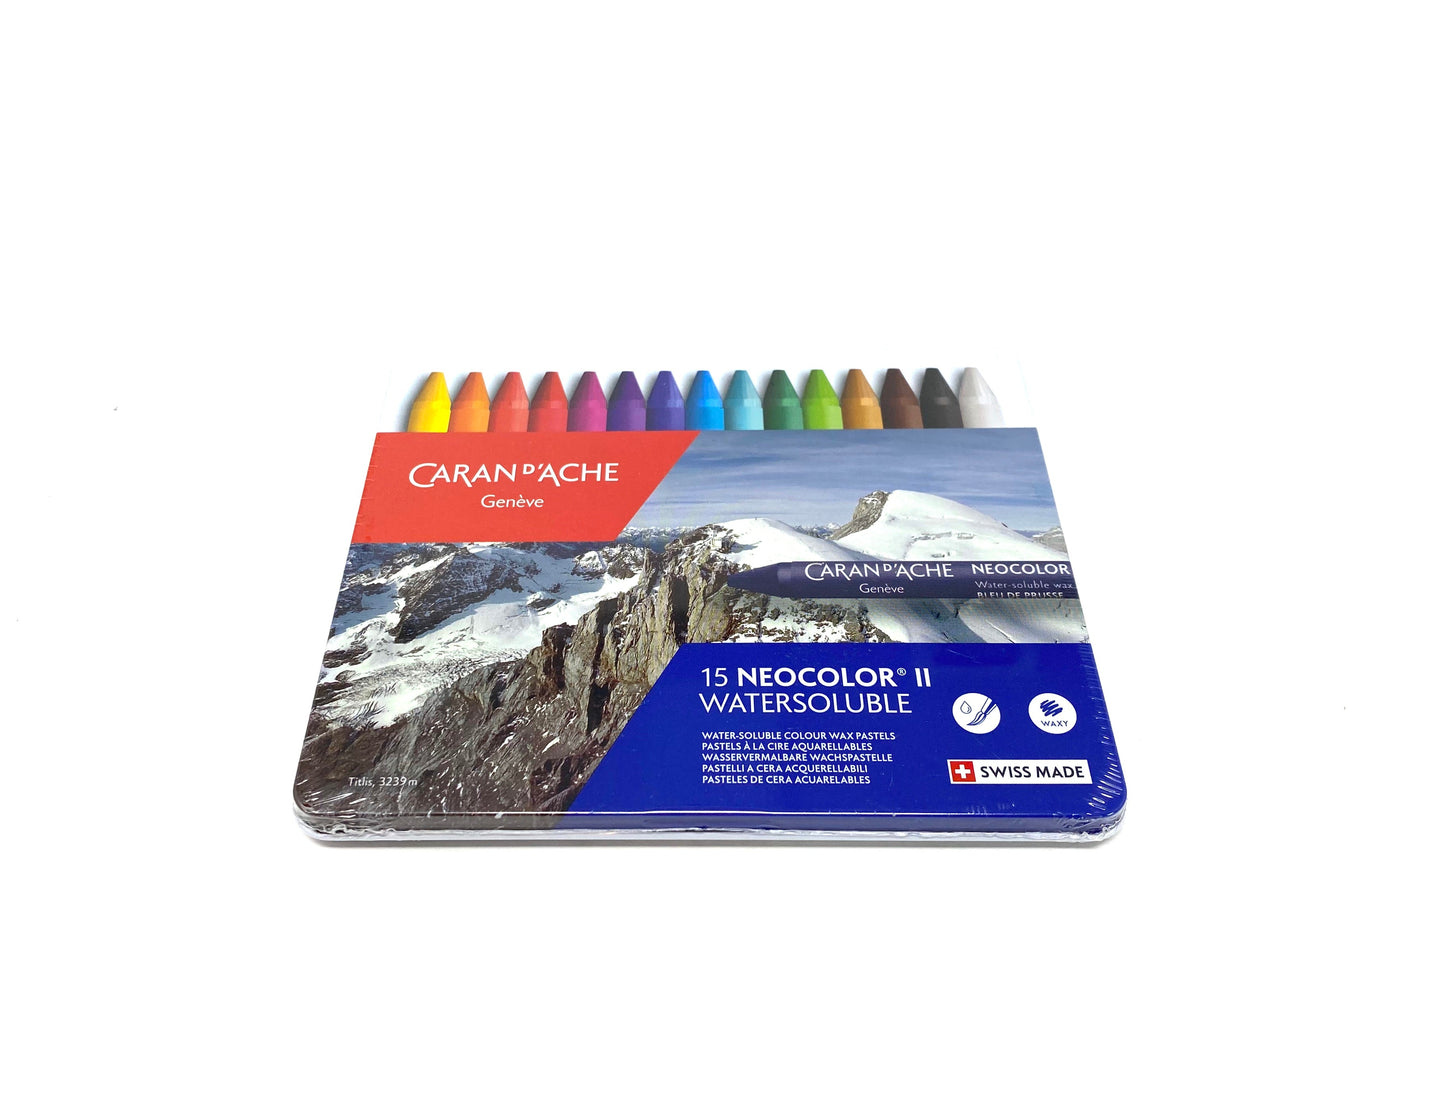 Caran dAche Neocolor I Wax Pastels and Sets